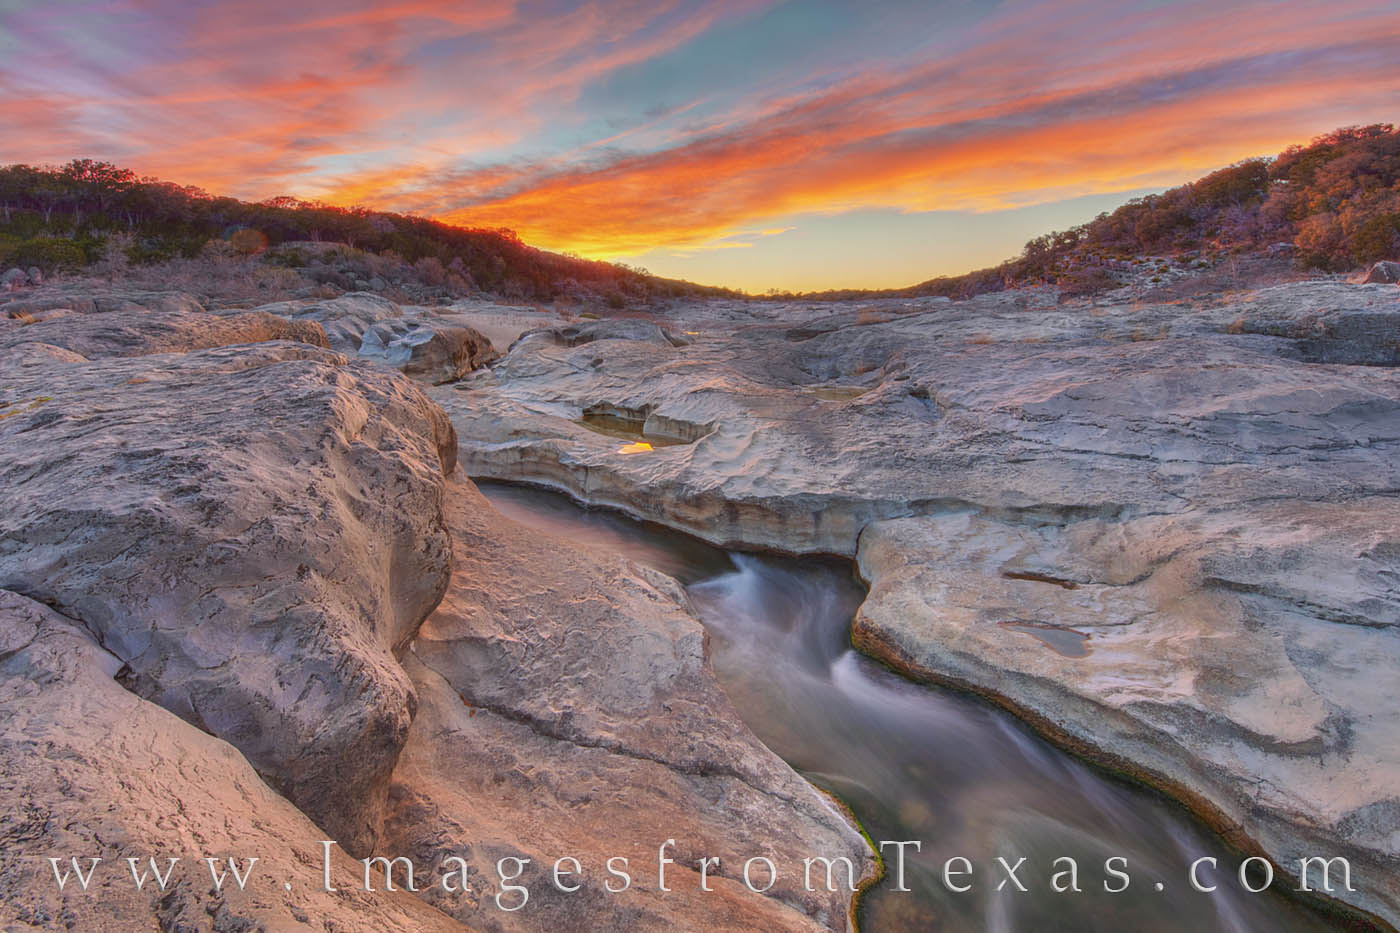 A beautiful sunset brings a spectacular ending to a fun evening at Pedernales Falls State Park. The river runs cool and clean...